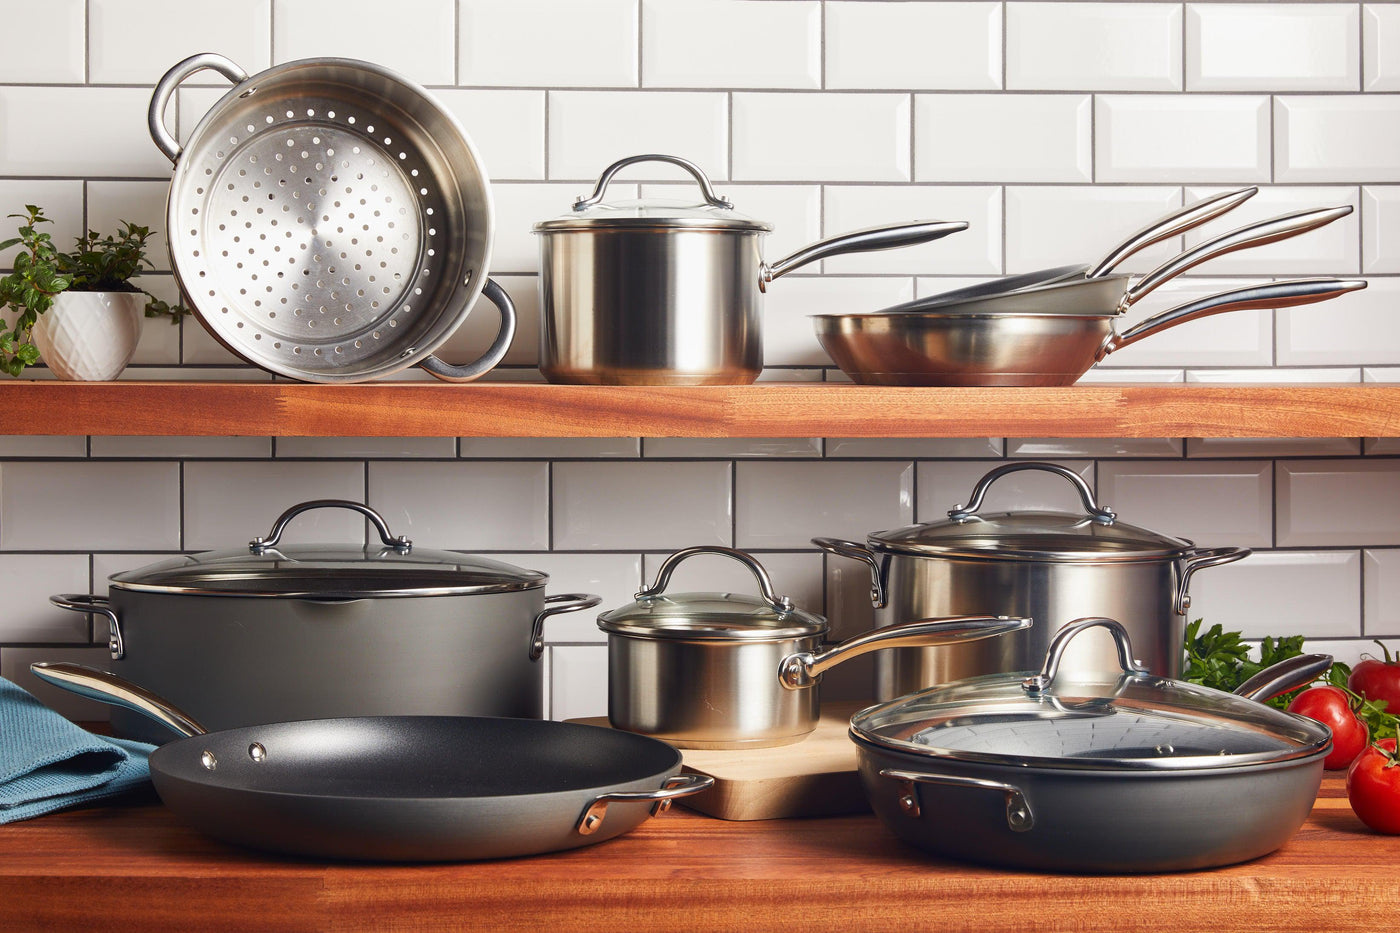 stainless-steel & hard-anodized nonstick cookware